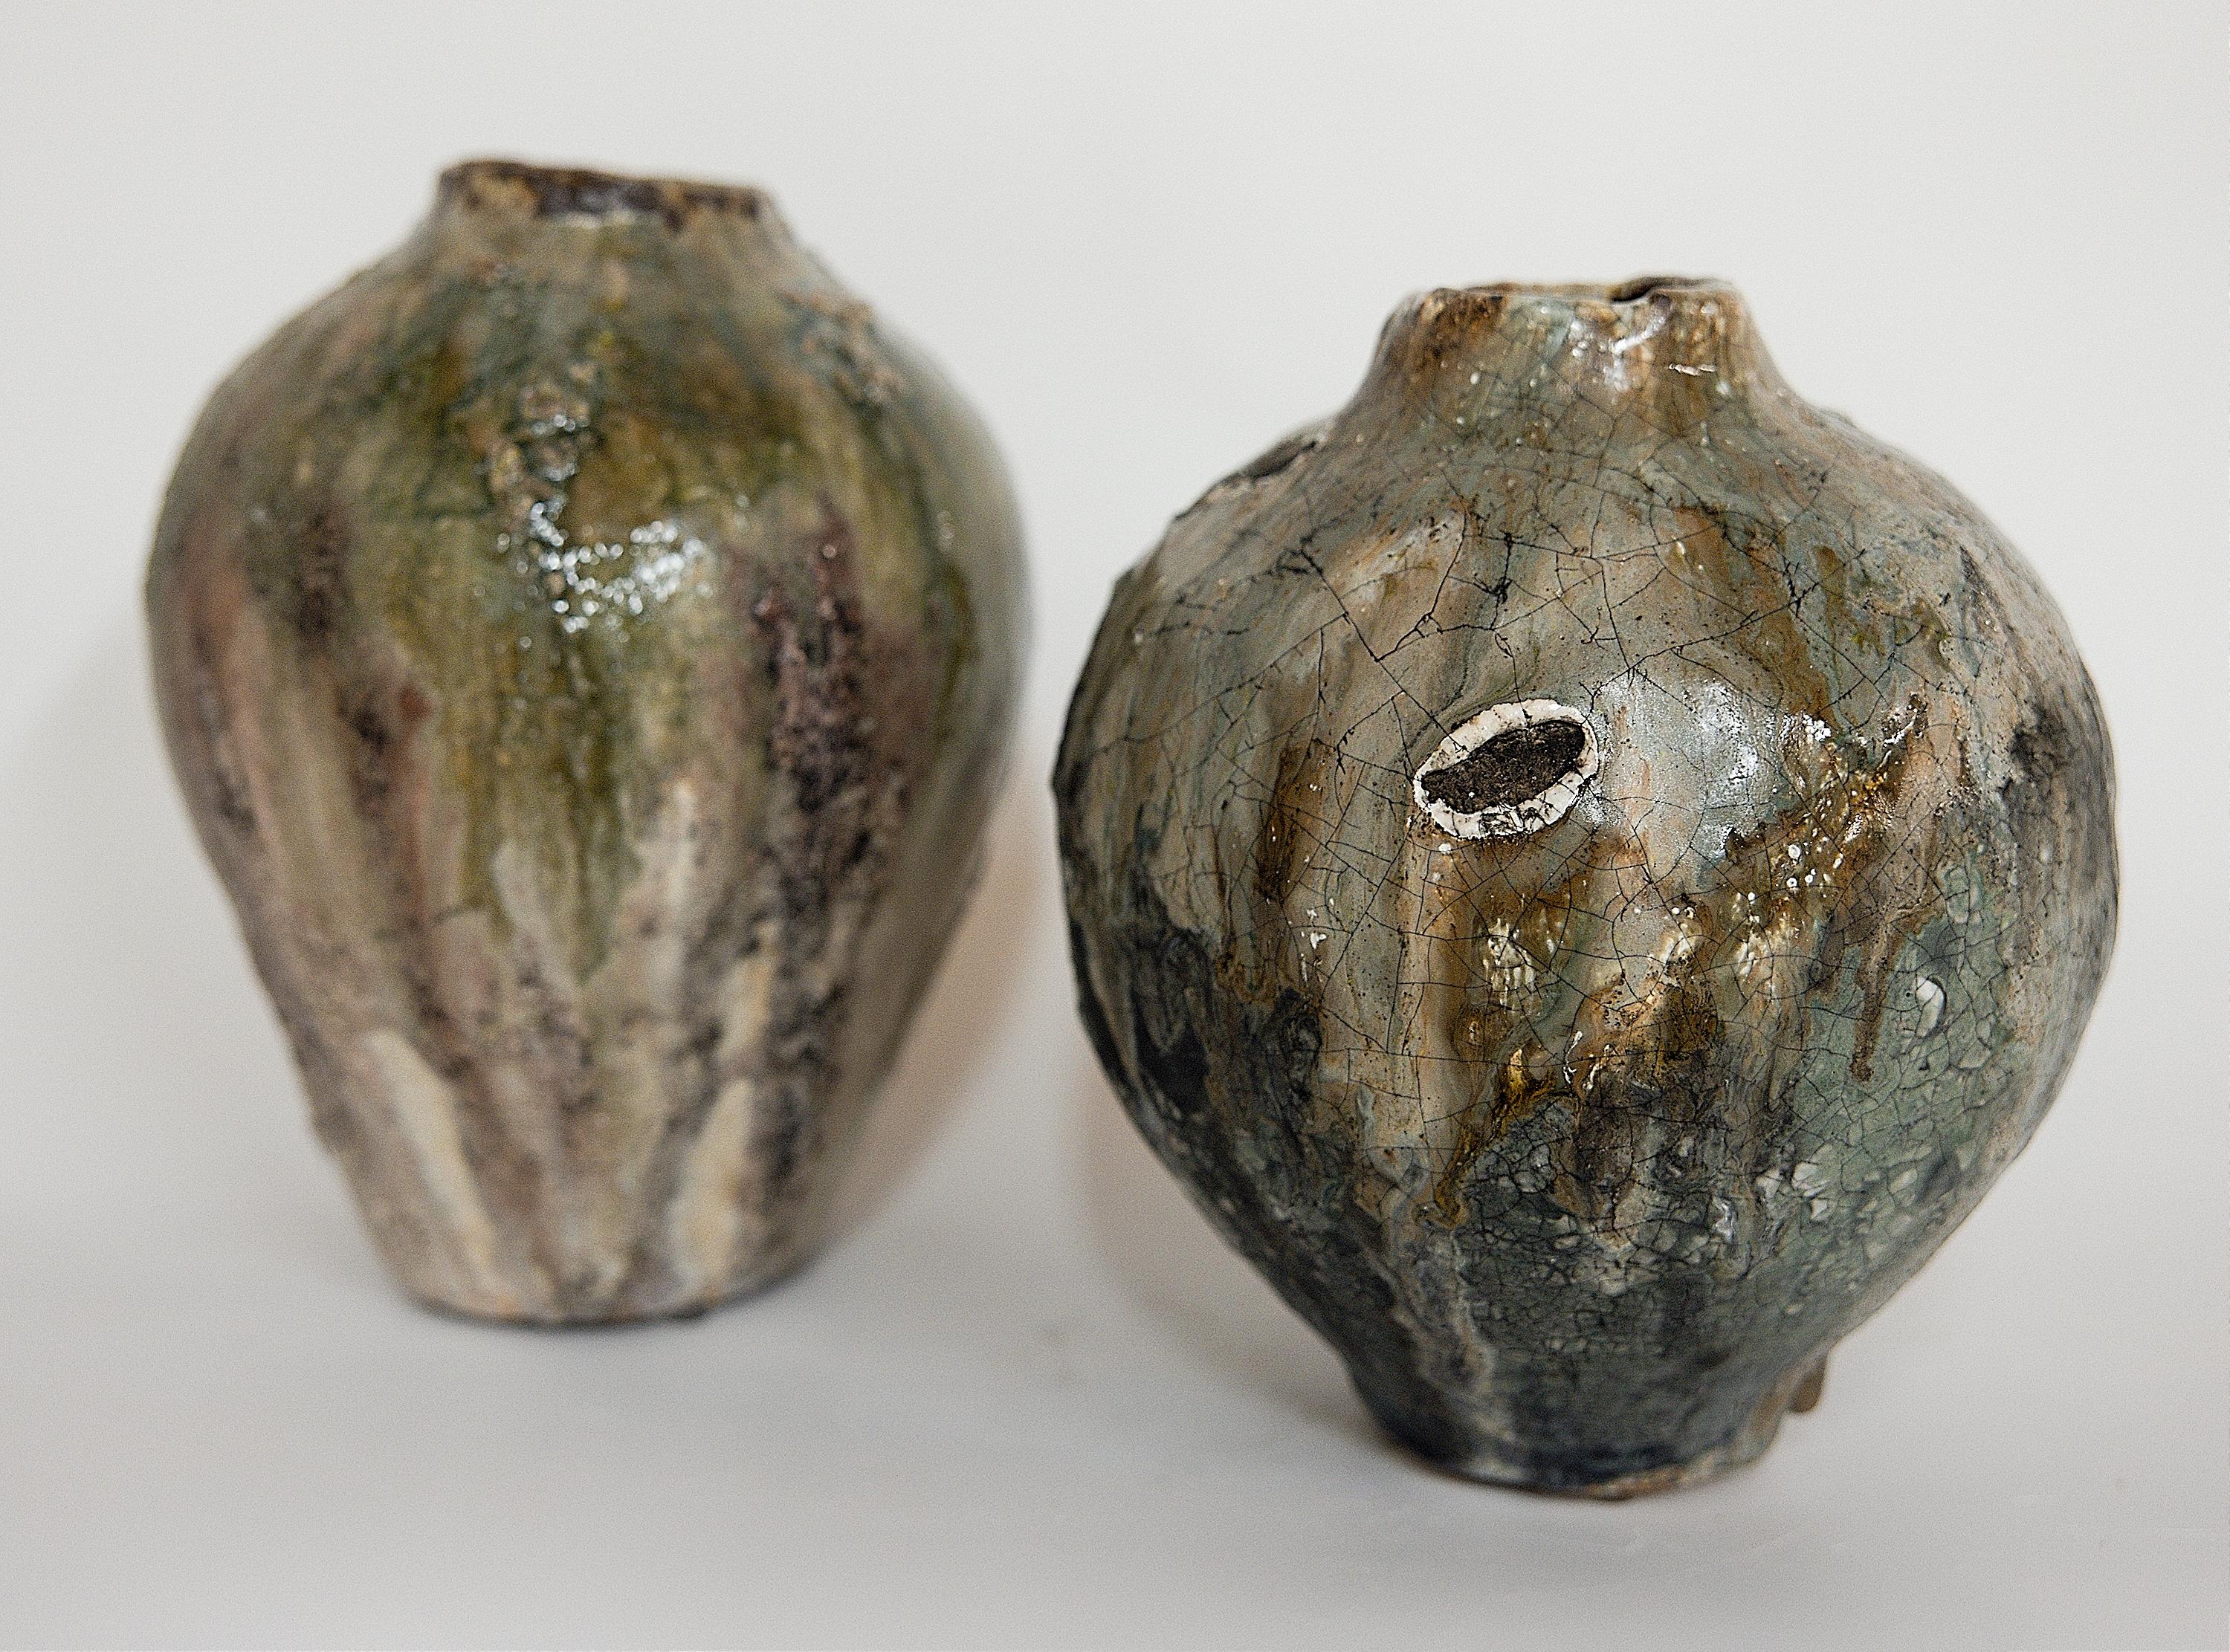 WOODLAND SERIES 
a mix of traditional with organic modernthis ginger jar shape with texture and many layers of custom glazes
Part of our new for FALL 2023 Woodland Series. Organic textures, colors and warm tones for your Fall decorating and floral